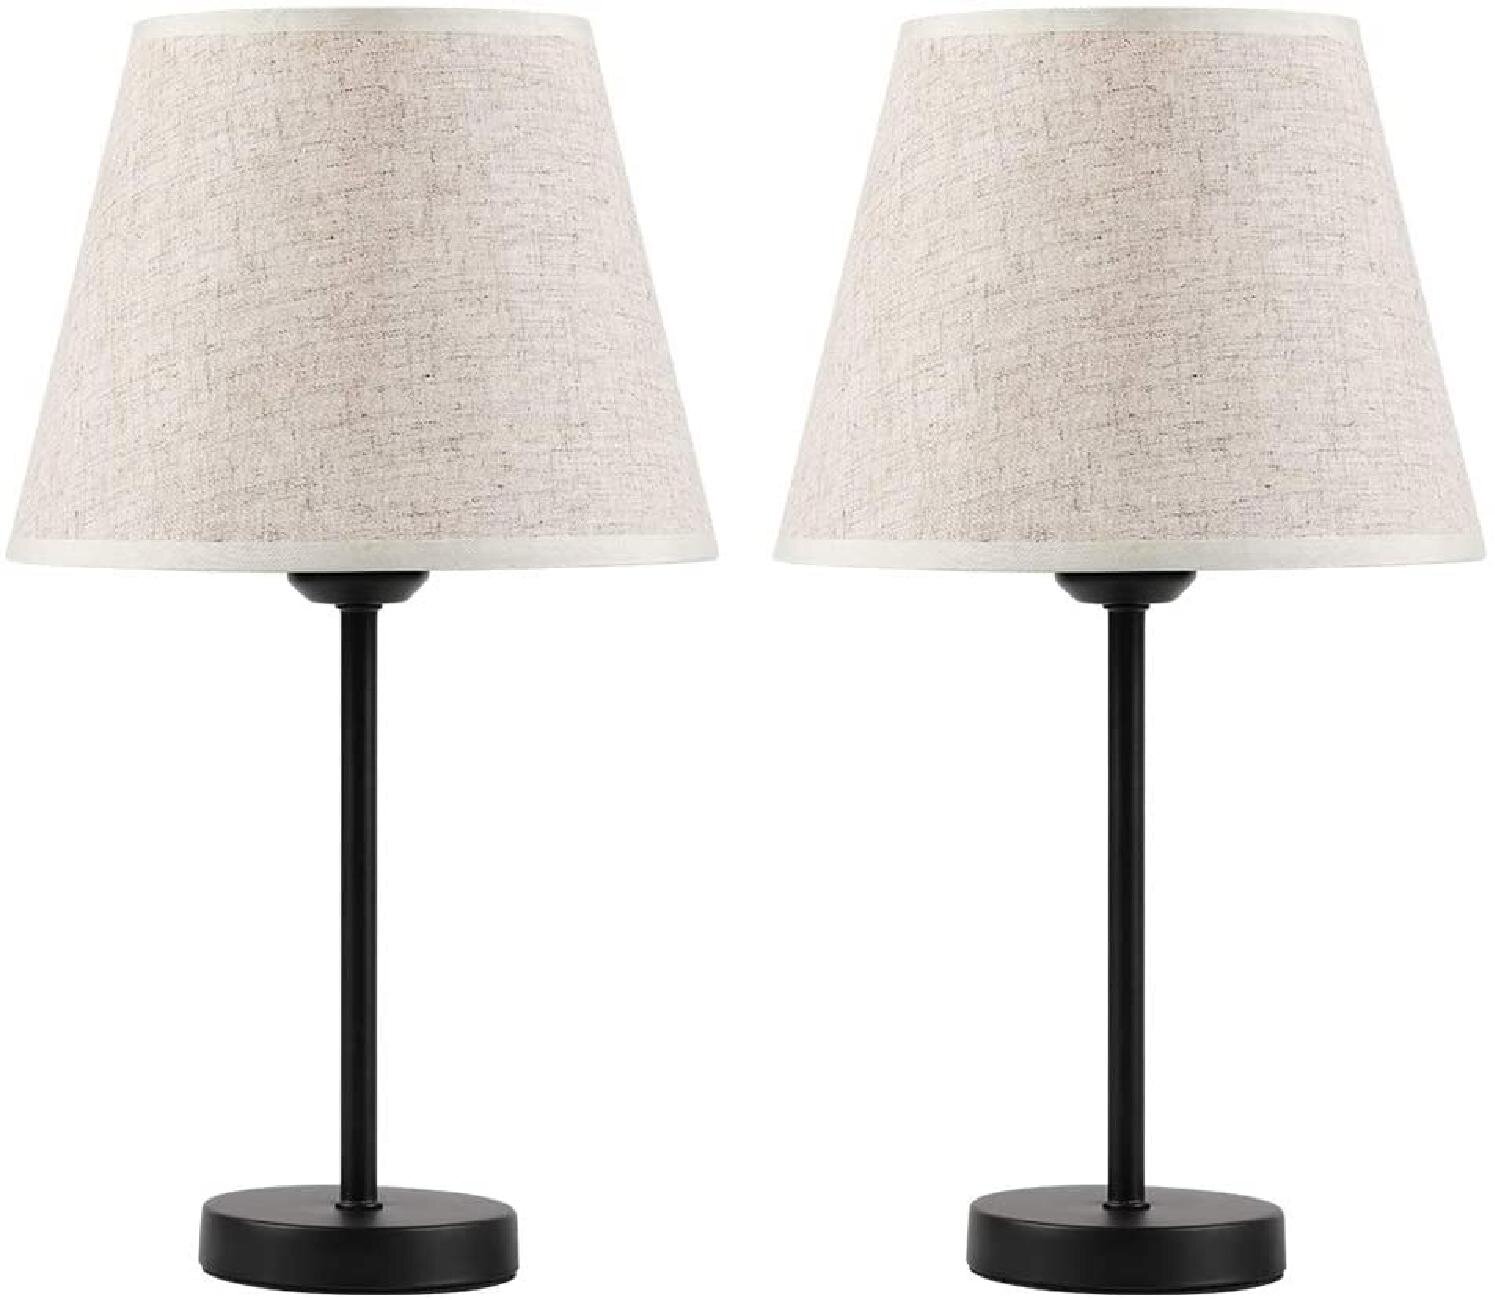 Baby Room Living Room Bookcase Simple Table Lamp Bedside Desk Lamp Set of 2,Bedside Table Lamp Retro Style Table Lamps with Fabric Shade Nightstand Mini Desk Lamps for Bedroom 